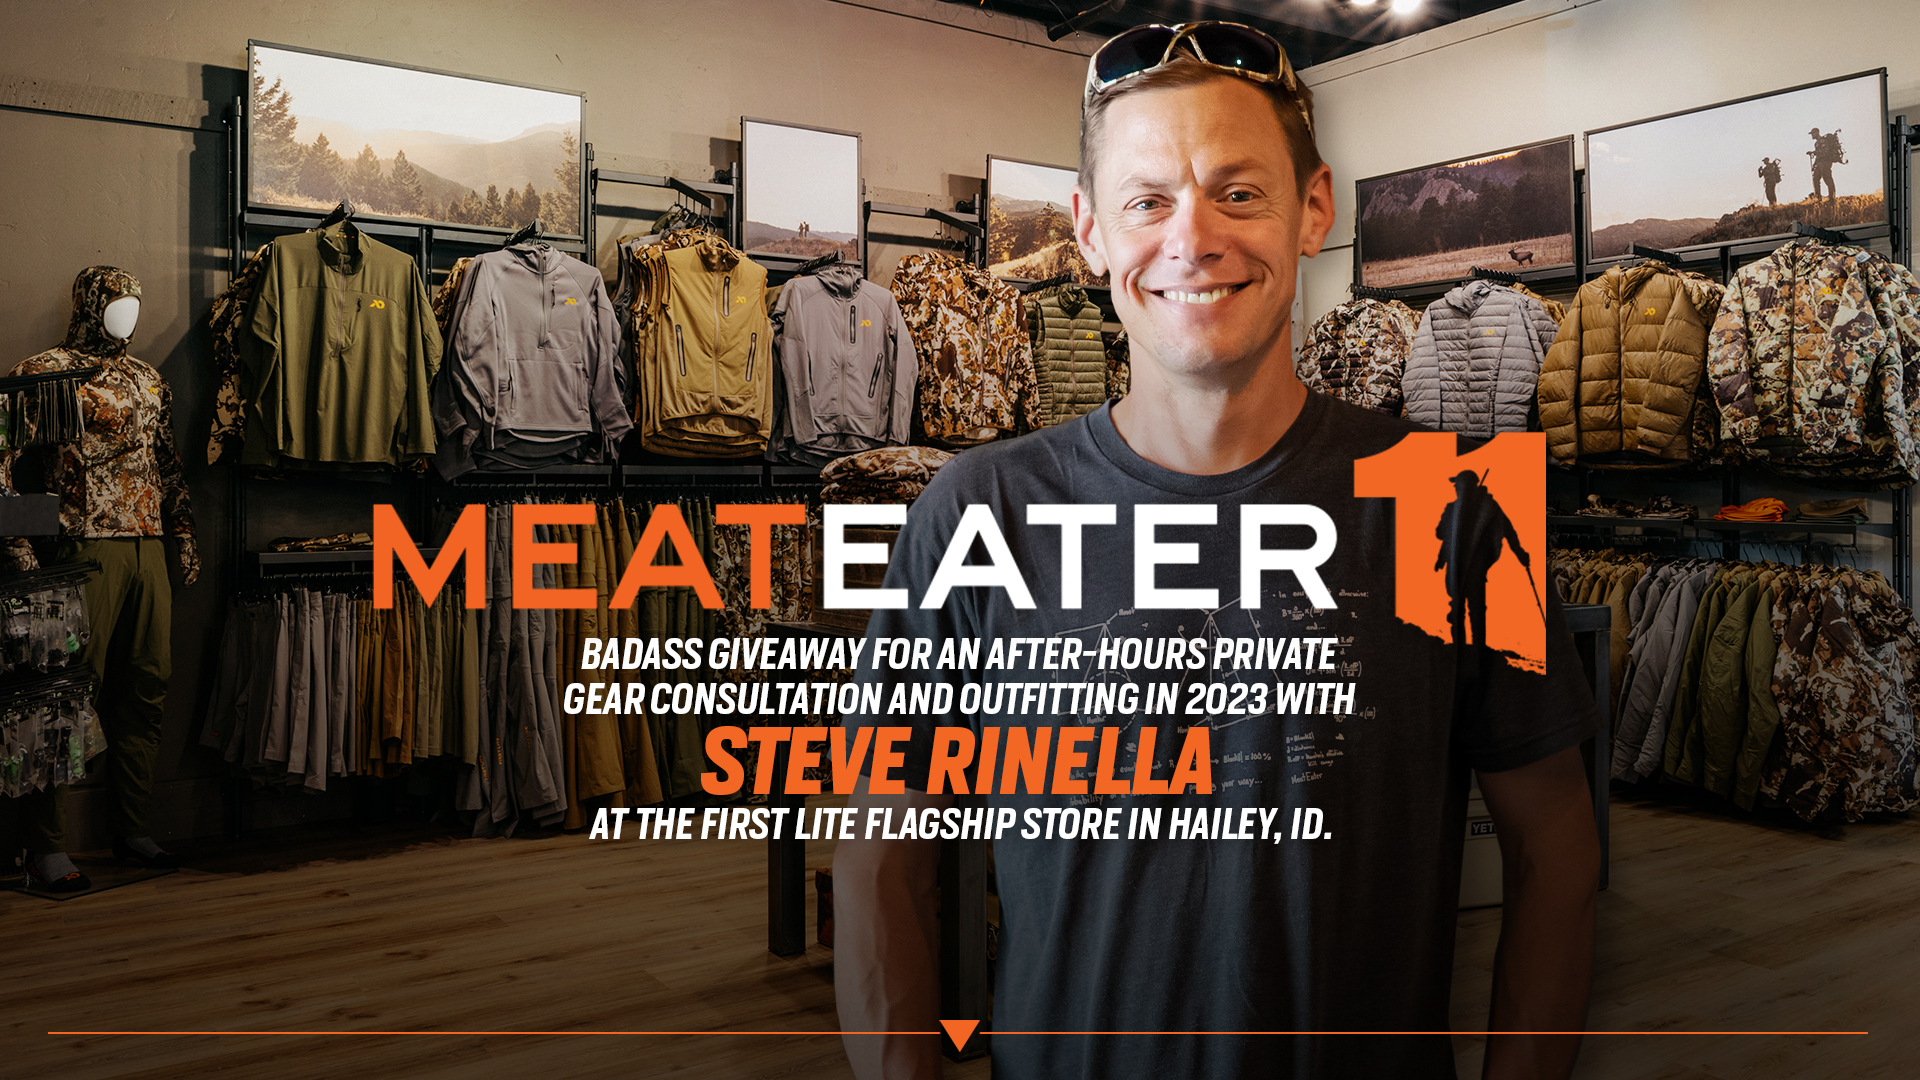 MeatEater Season 11 Giveaway